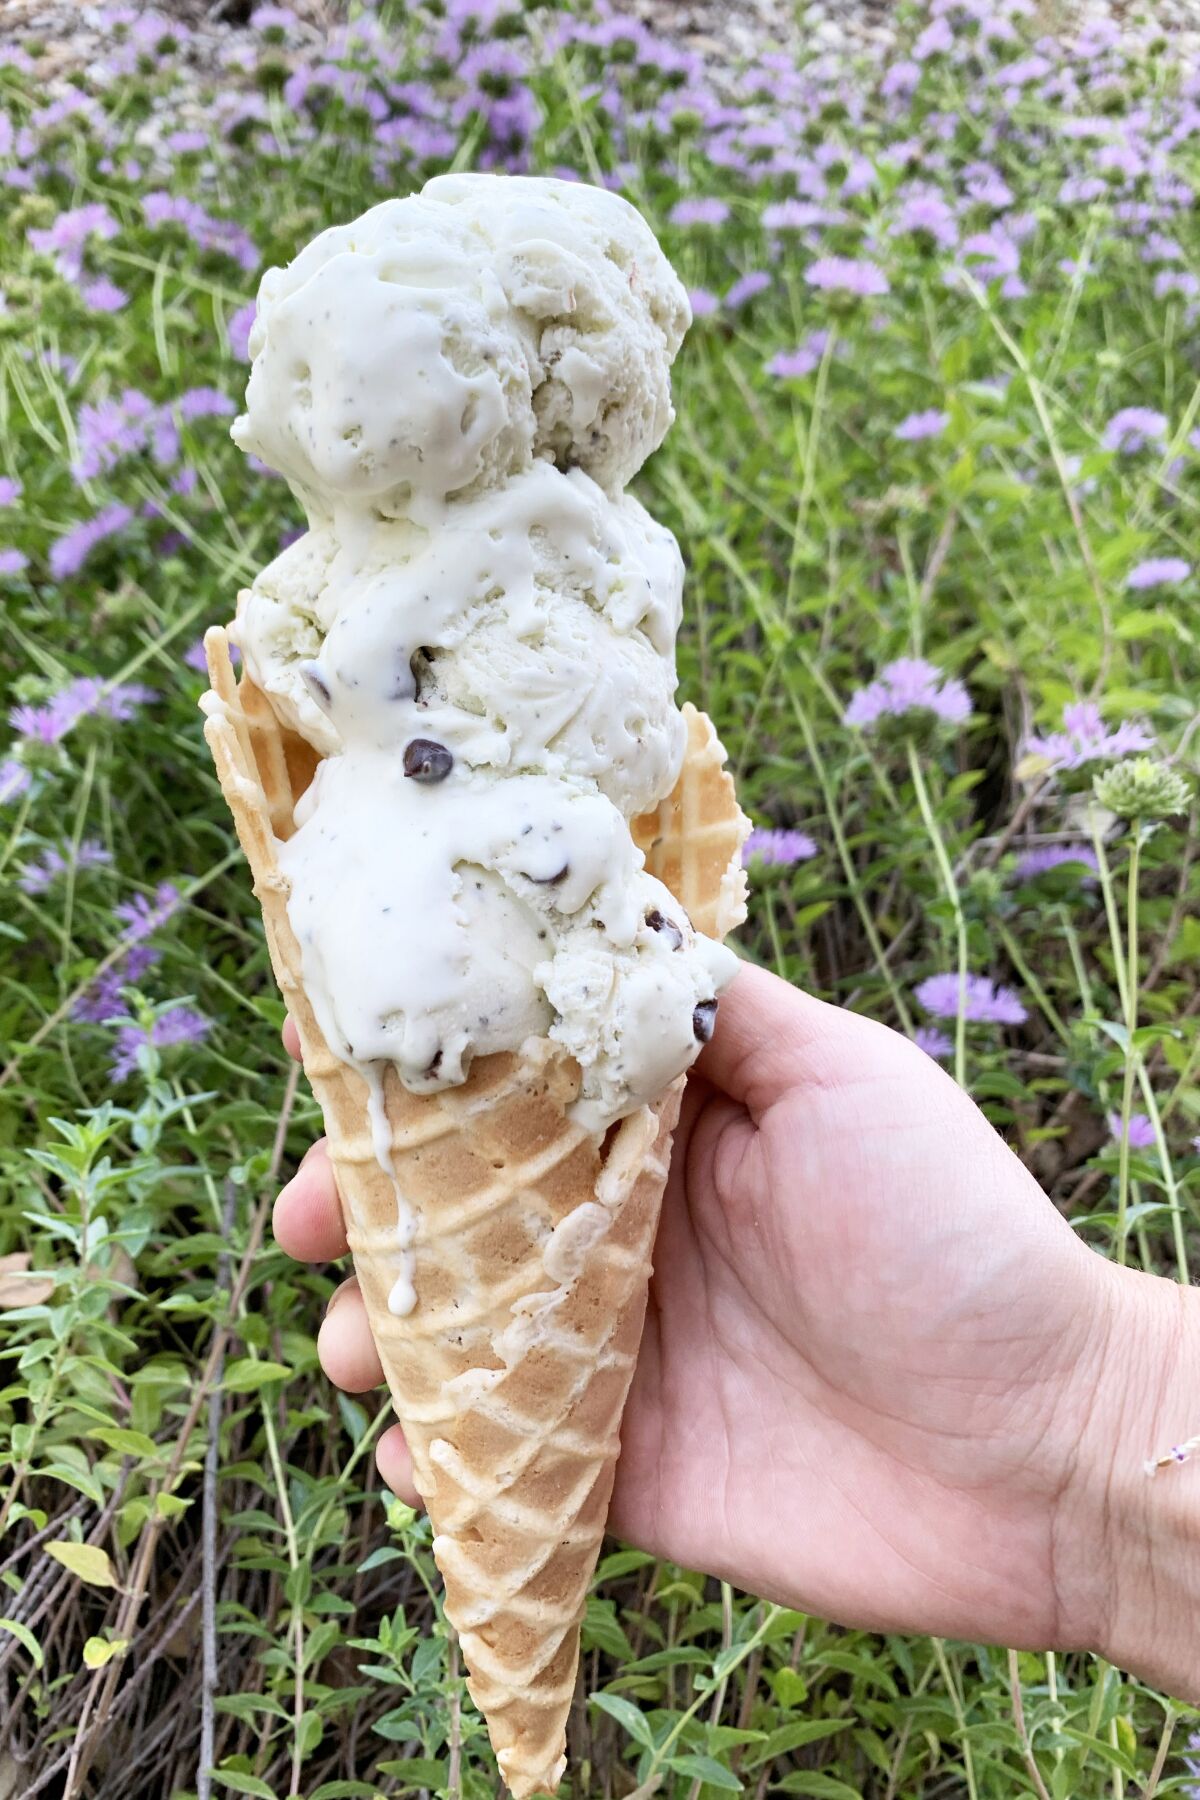 A triple-dip cone of coyote mint chip ice cream, flavored by the purple-flowered coyote mint.